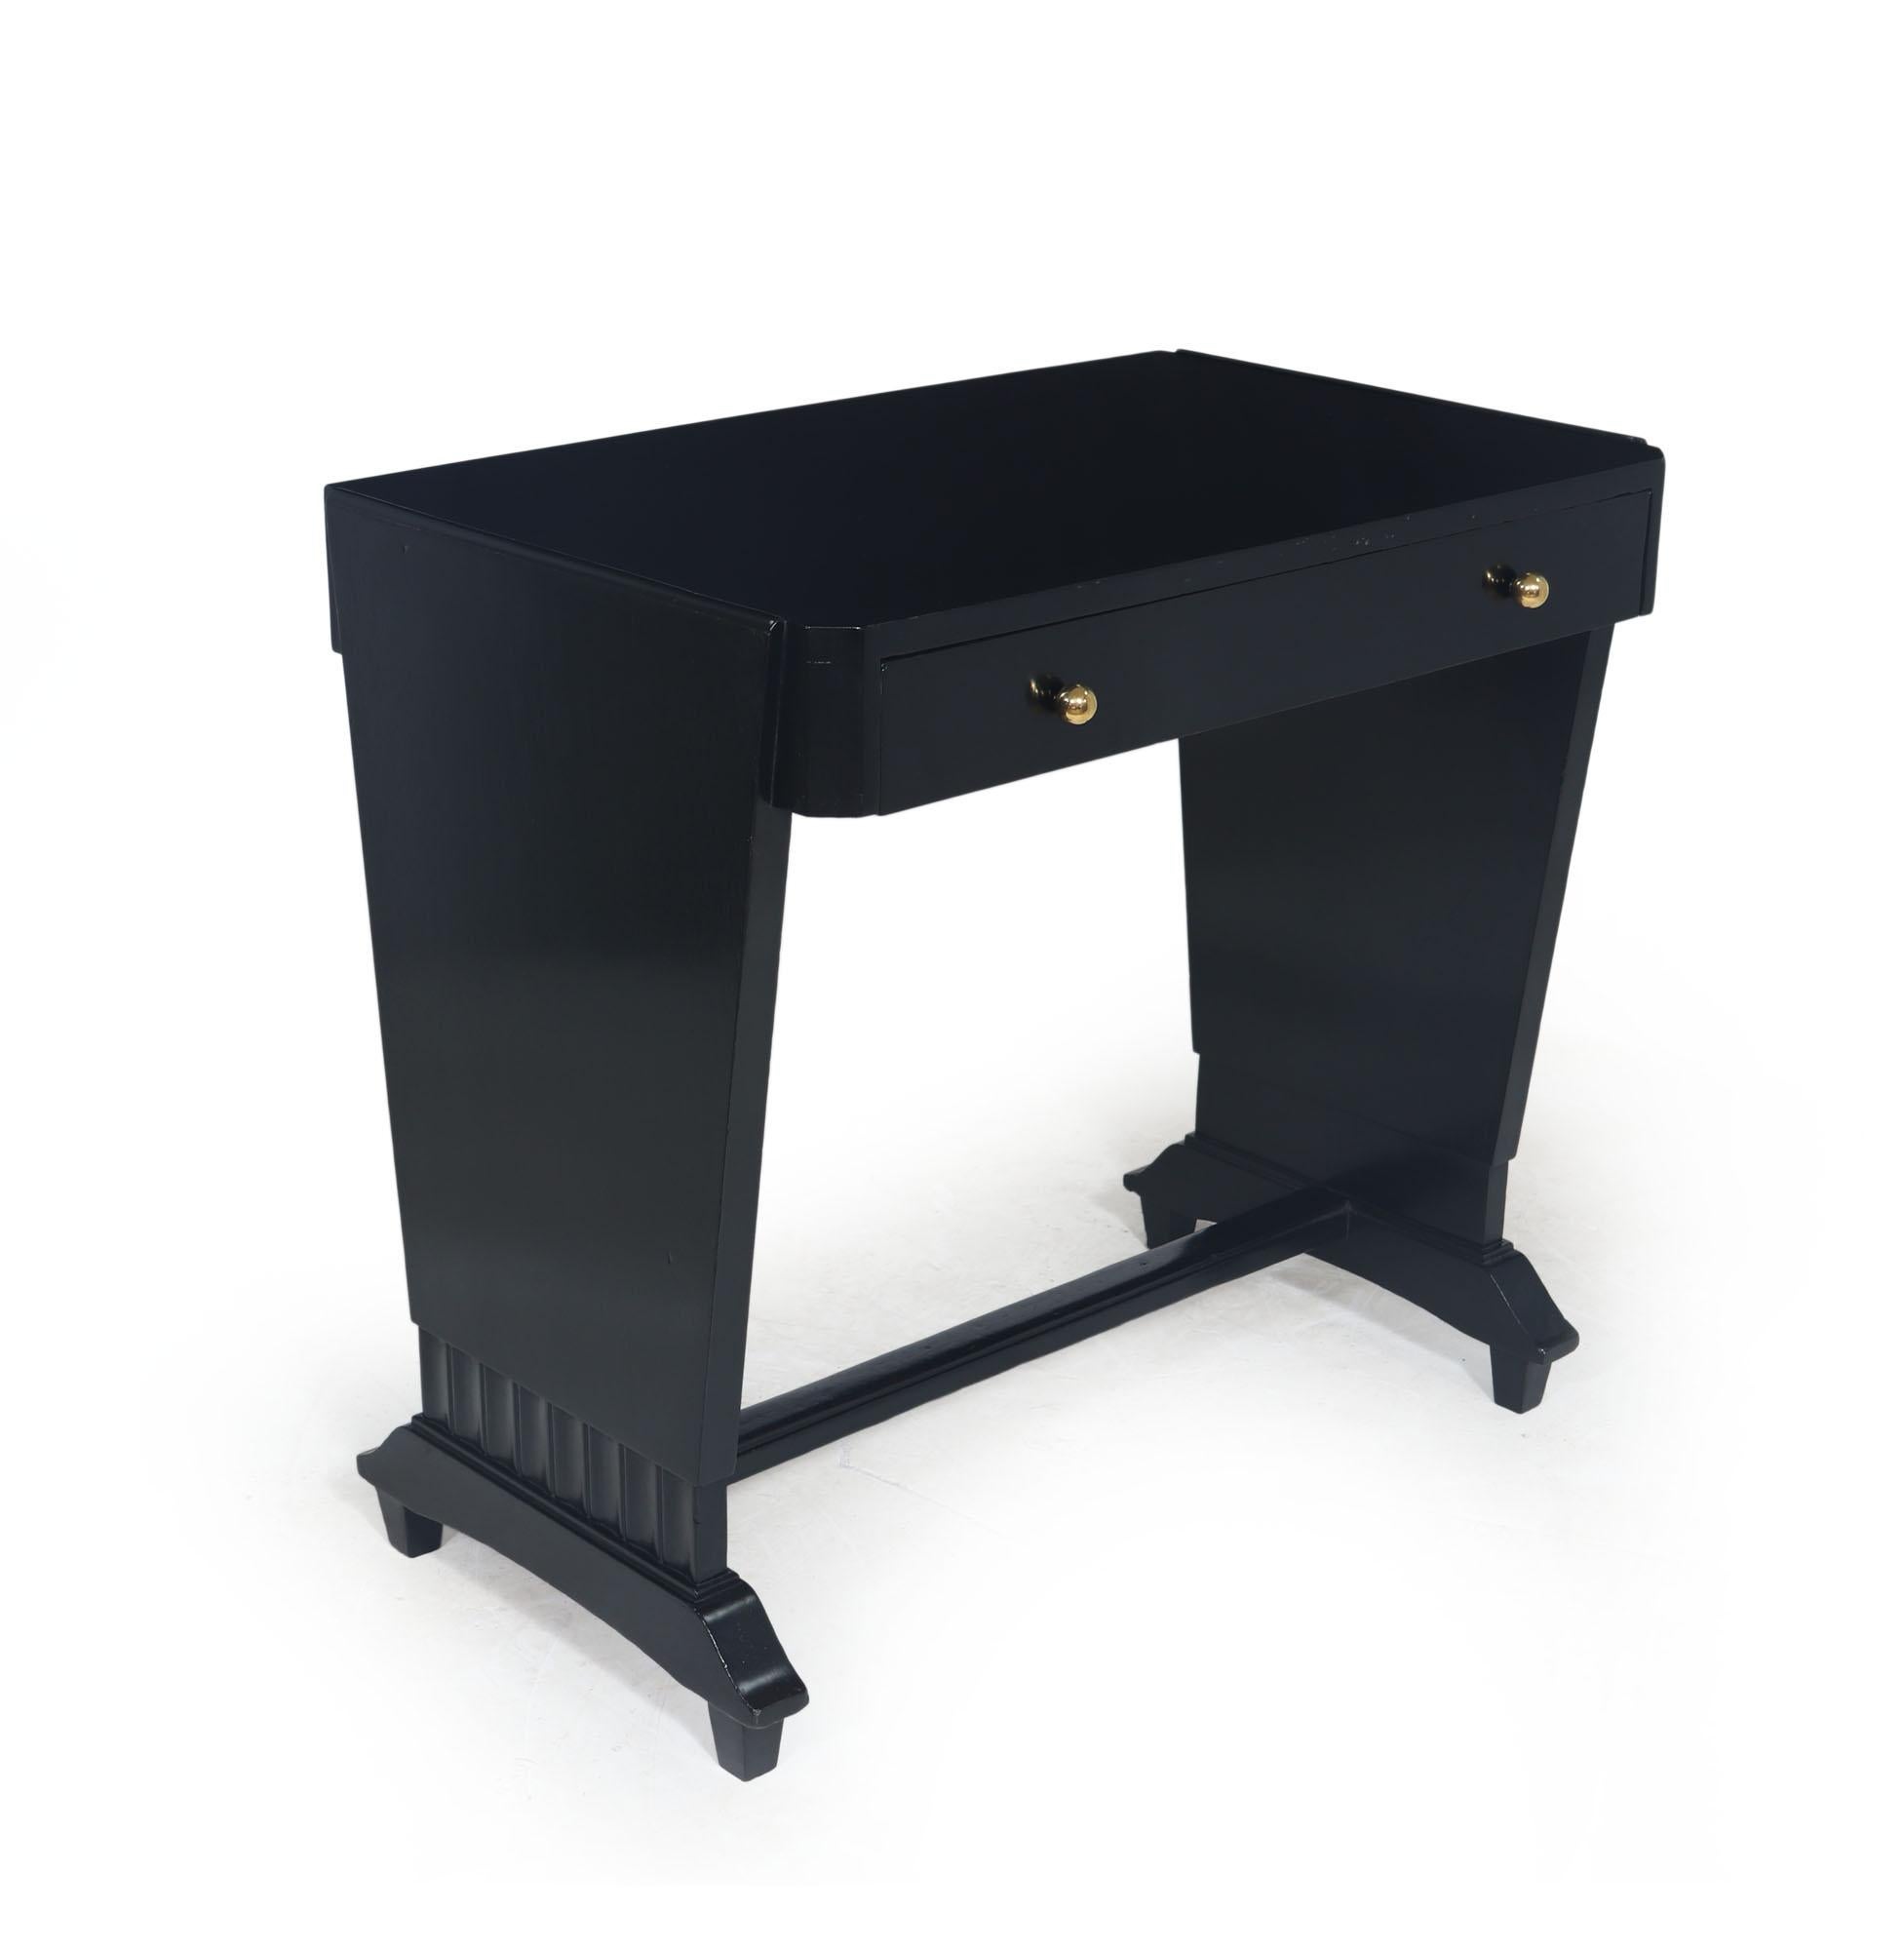 Art Deco ladies black desk
A small single drawer desk produced in France in the 1930's, with brass ball handles, standing on gently sloped side panels with stepped and fluted panel underneath, the desk is of great quality and stands elegantly as to